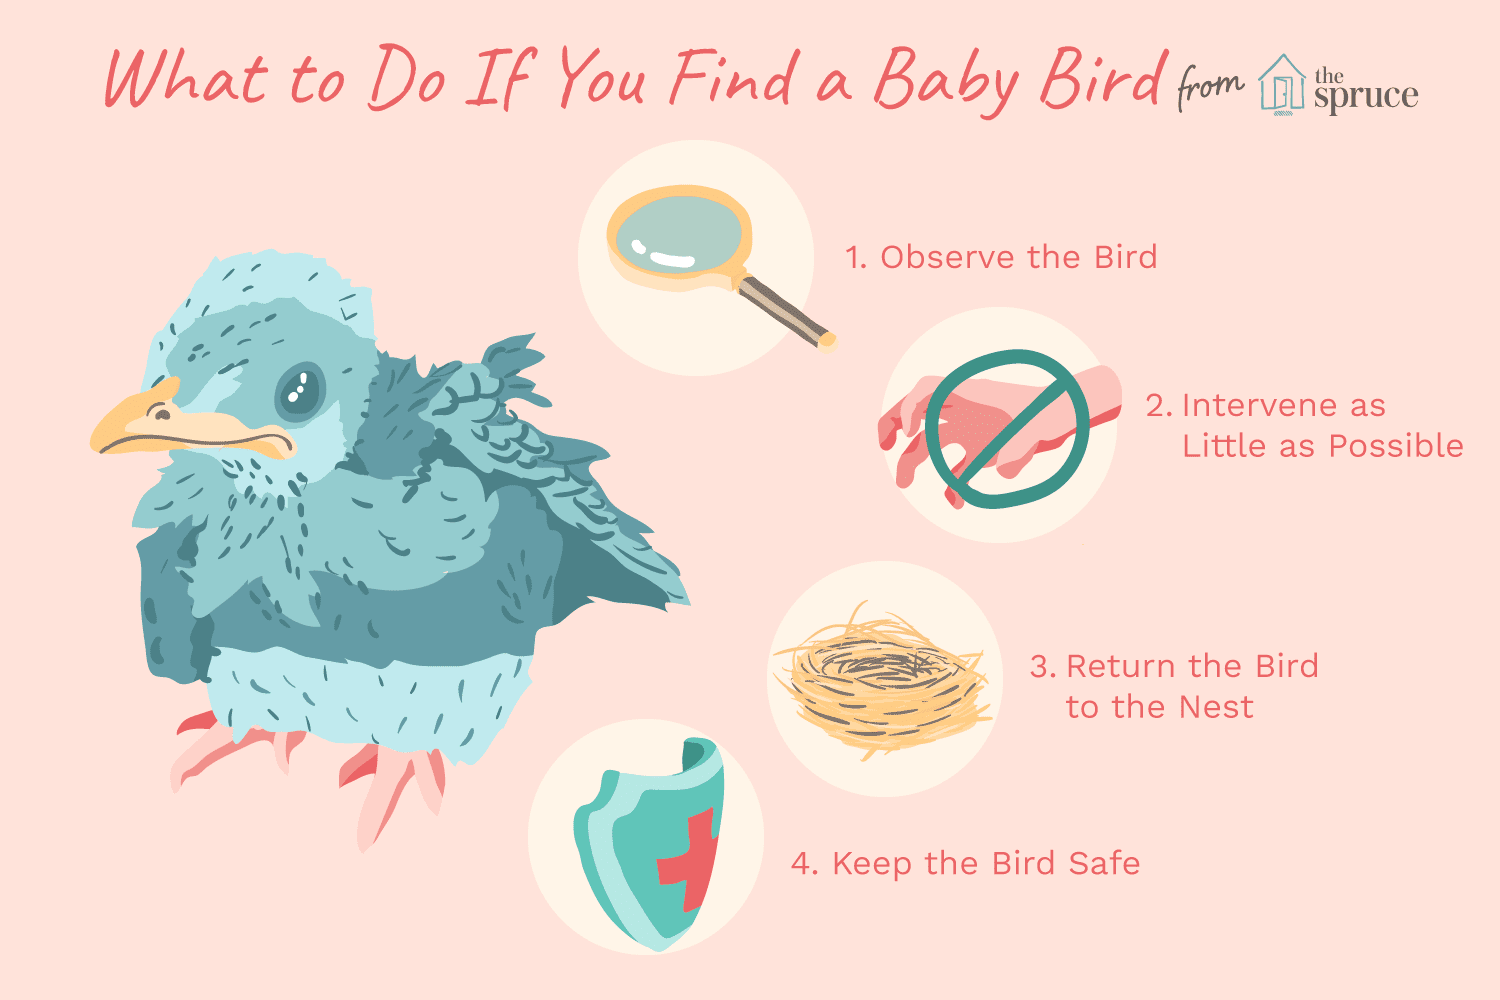 What to do if you see a bird on the ground?